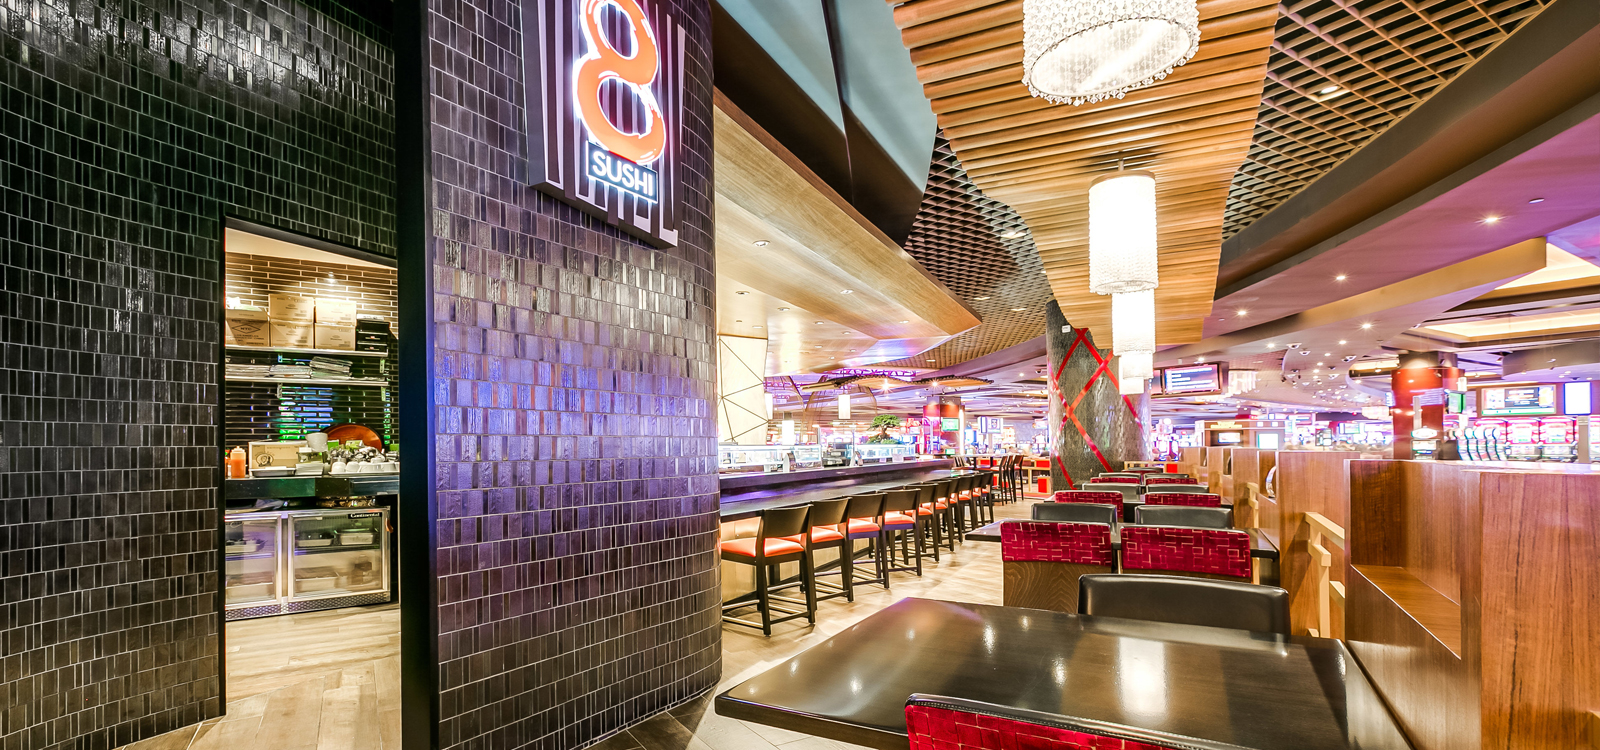 8 at Luk Fu, Maryland Live Casino, Baltimore MD, commercial renovation by UrbanBuilt